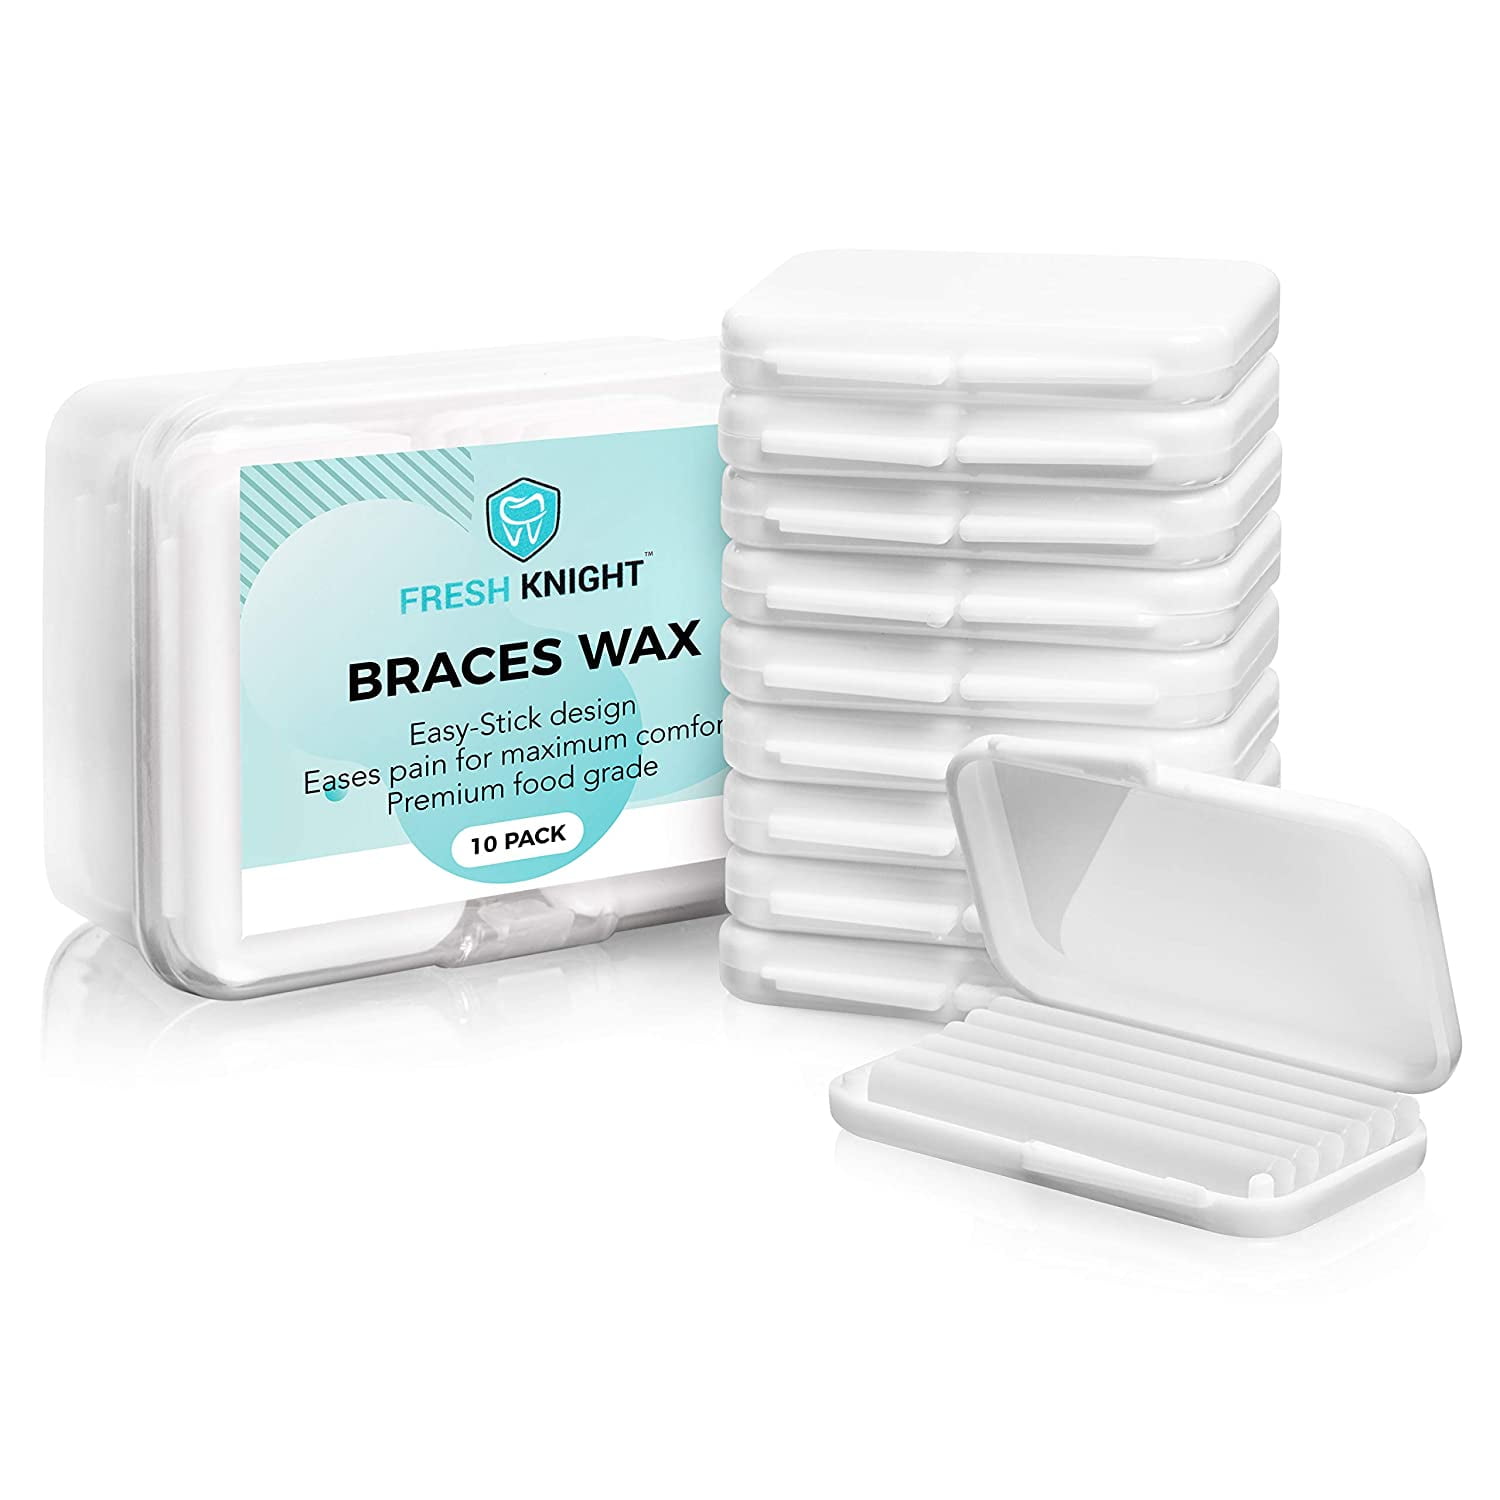 Silicone Dental Wax for Braces - Box of 40